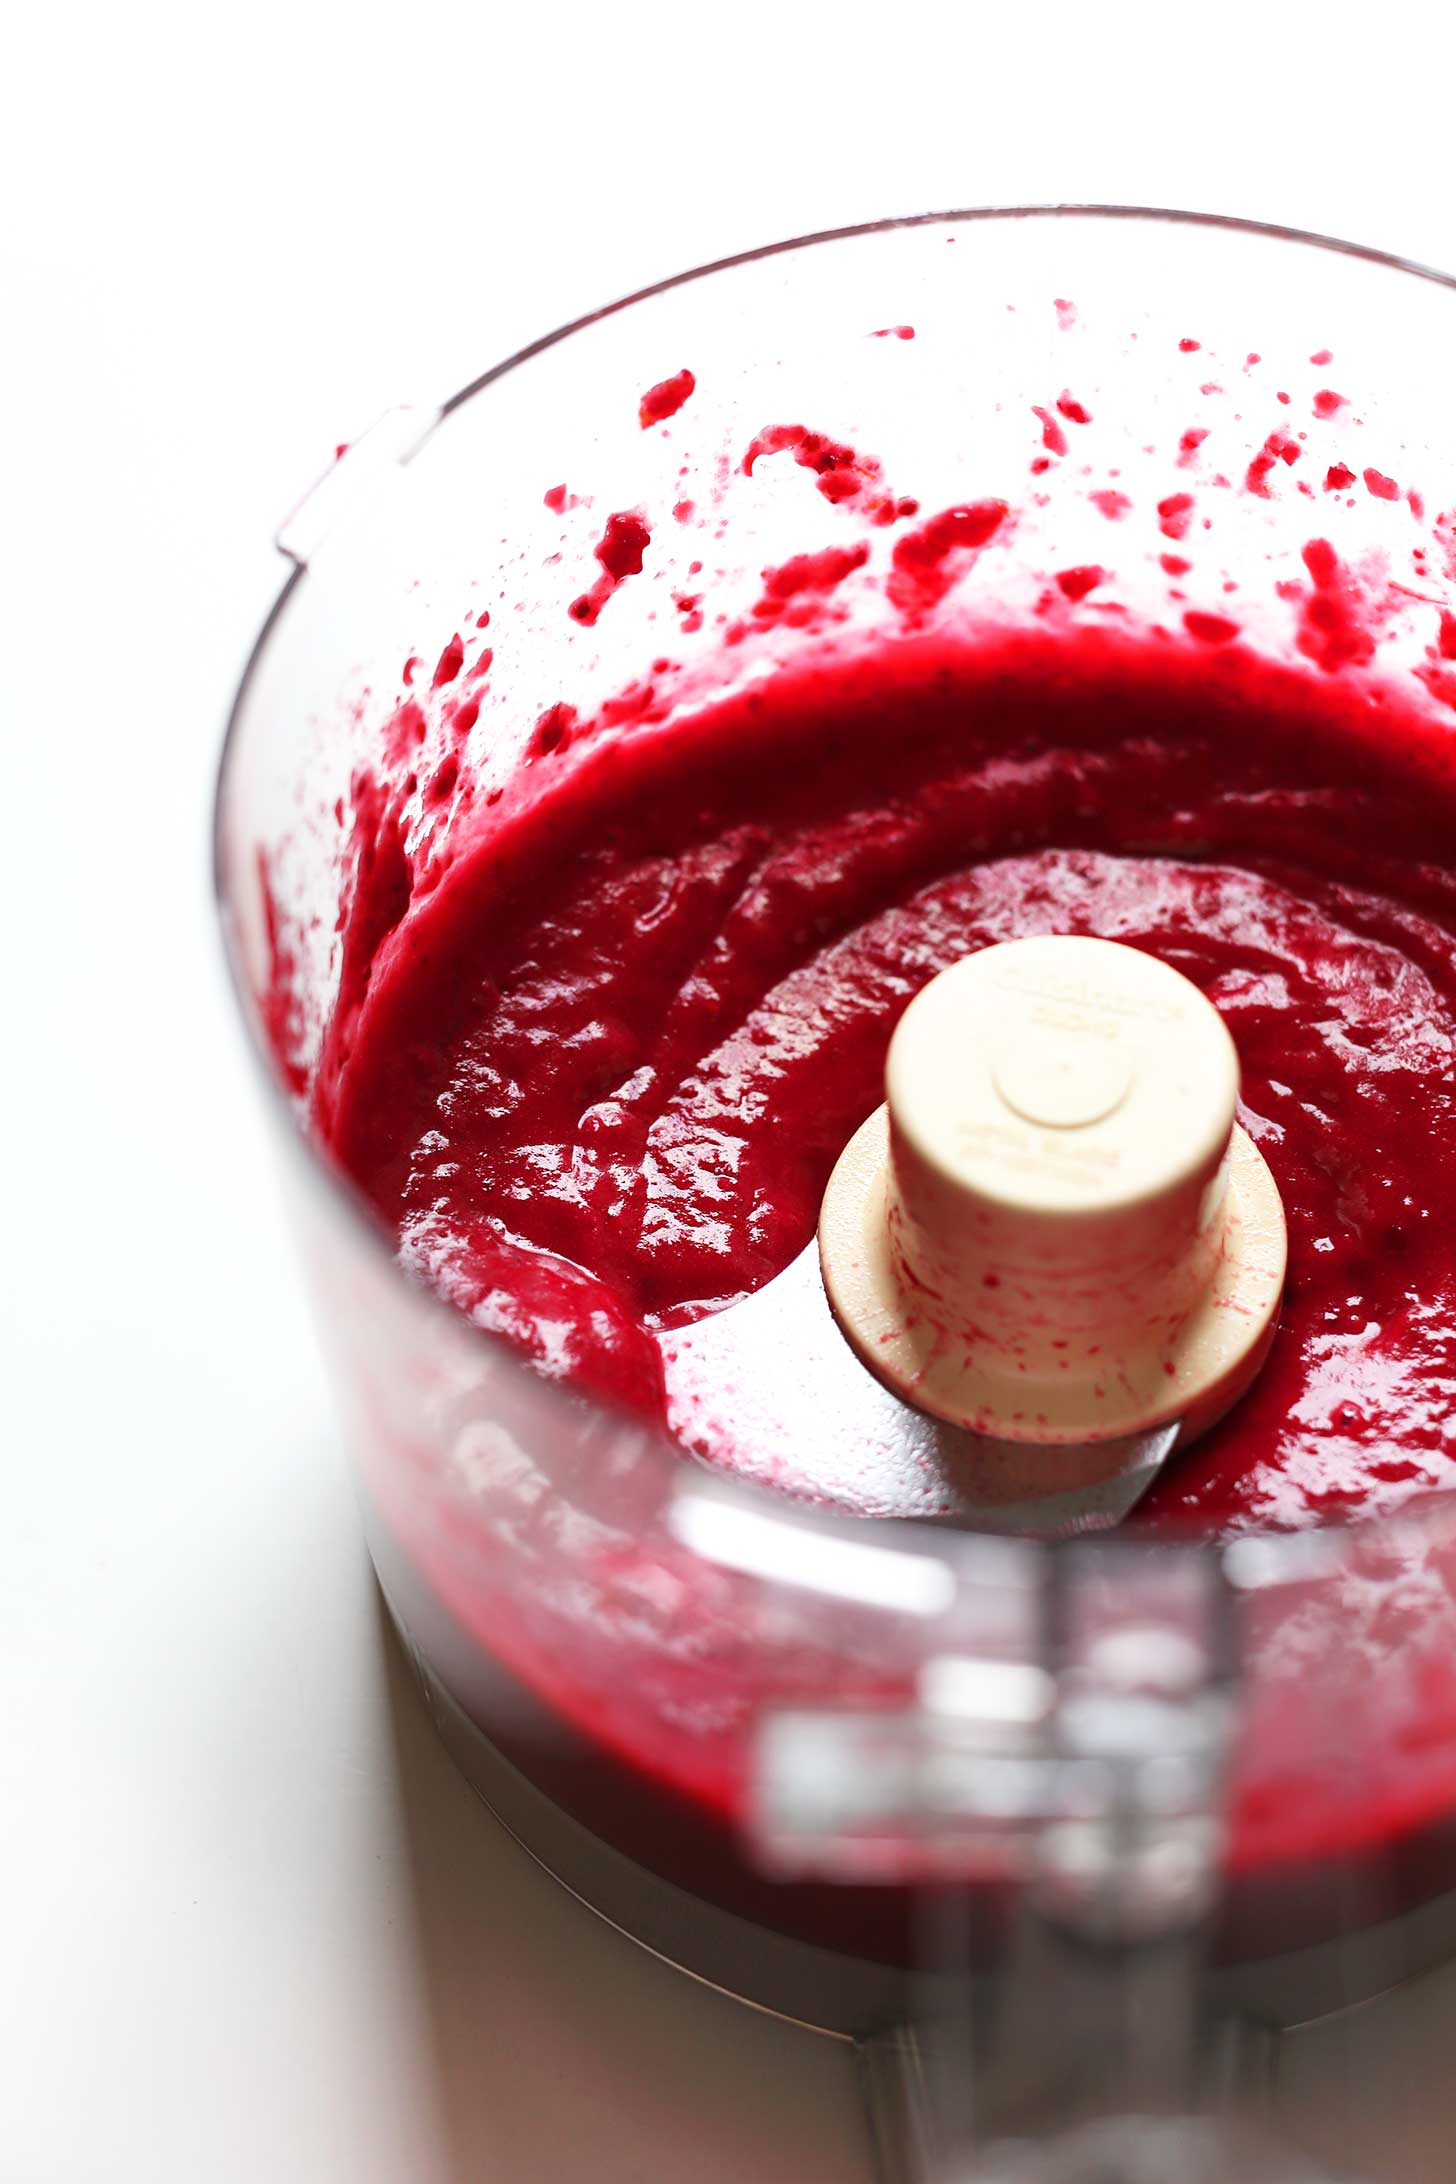 Food processor with freshly blended Cranberry-Pear reduction for a New Year's Eve beverage